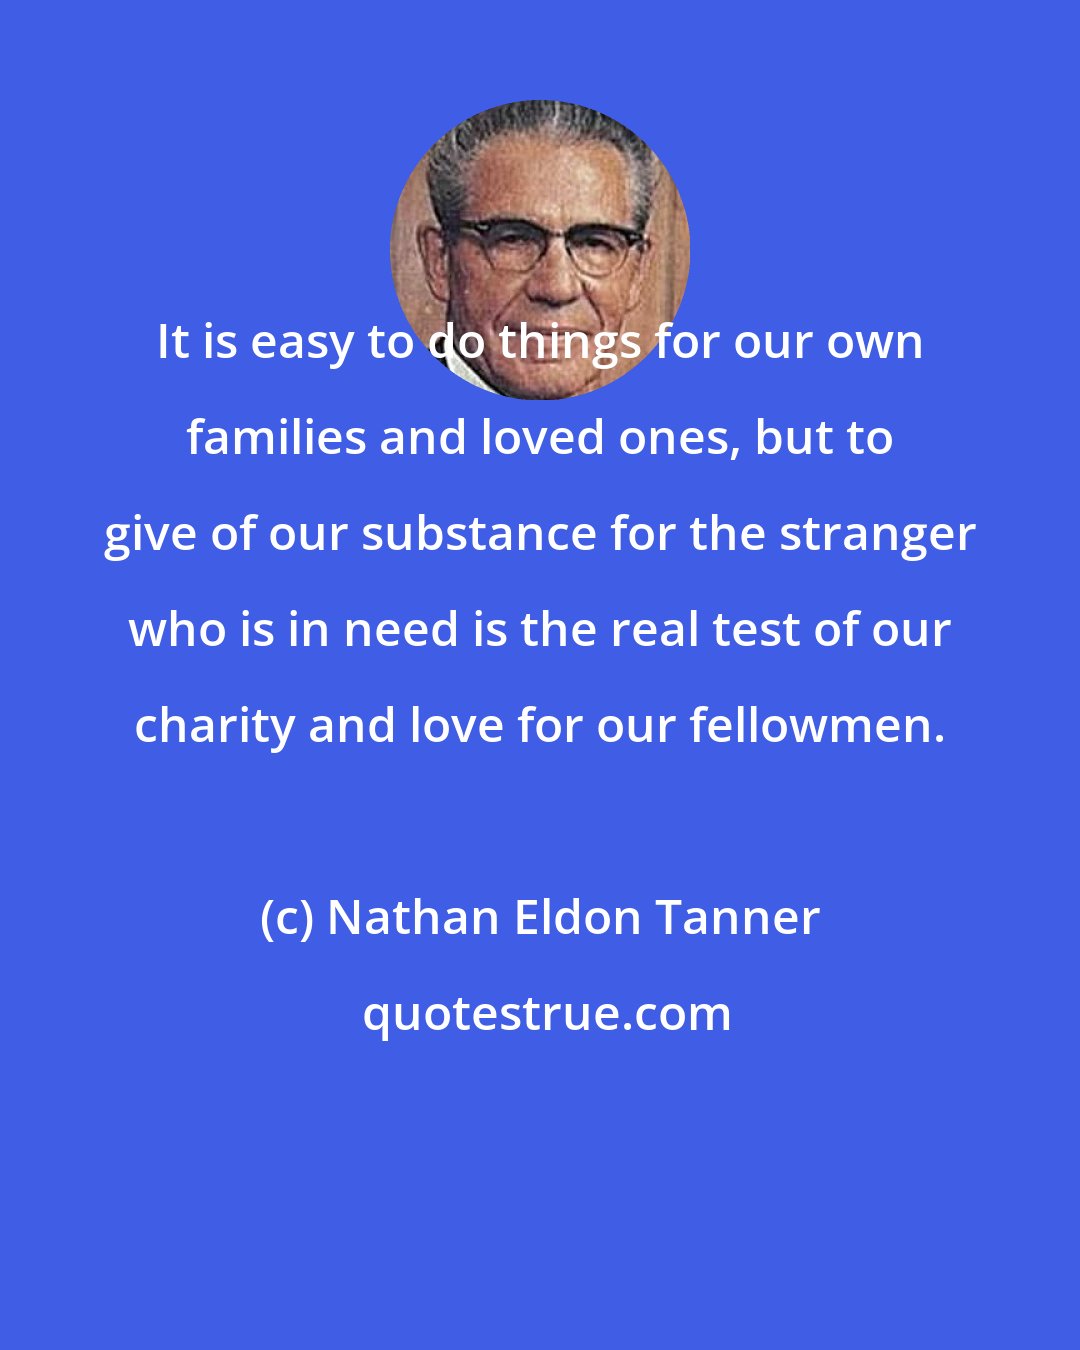 Nathan Eldon Tanner: It is easy to do things for our own families and loved ones, but to give of our substance for the stranger who is in need is the real test of our charity and love for our fellowmen.